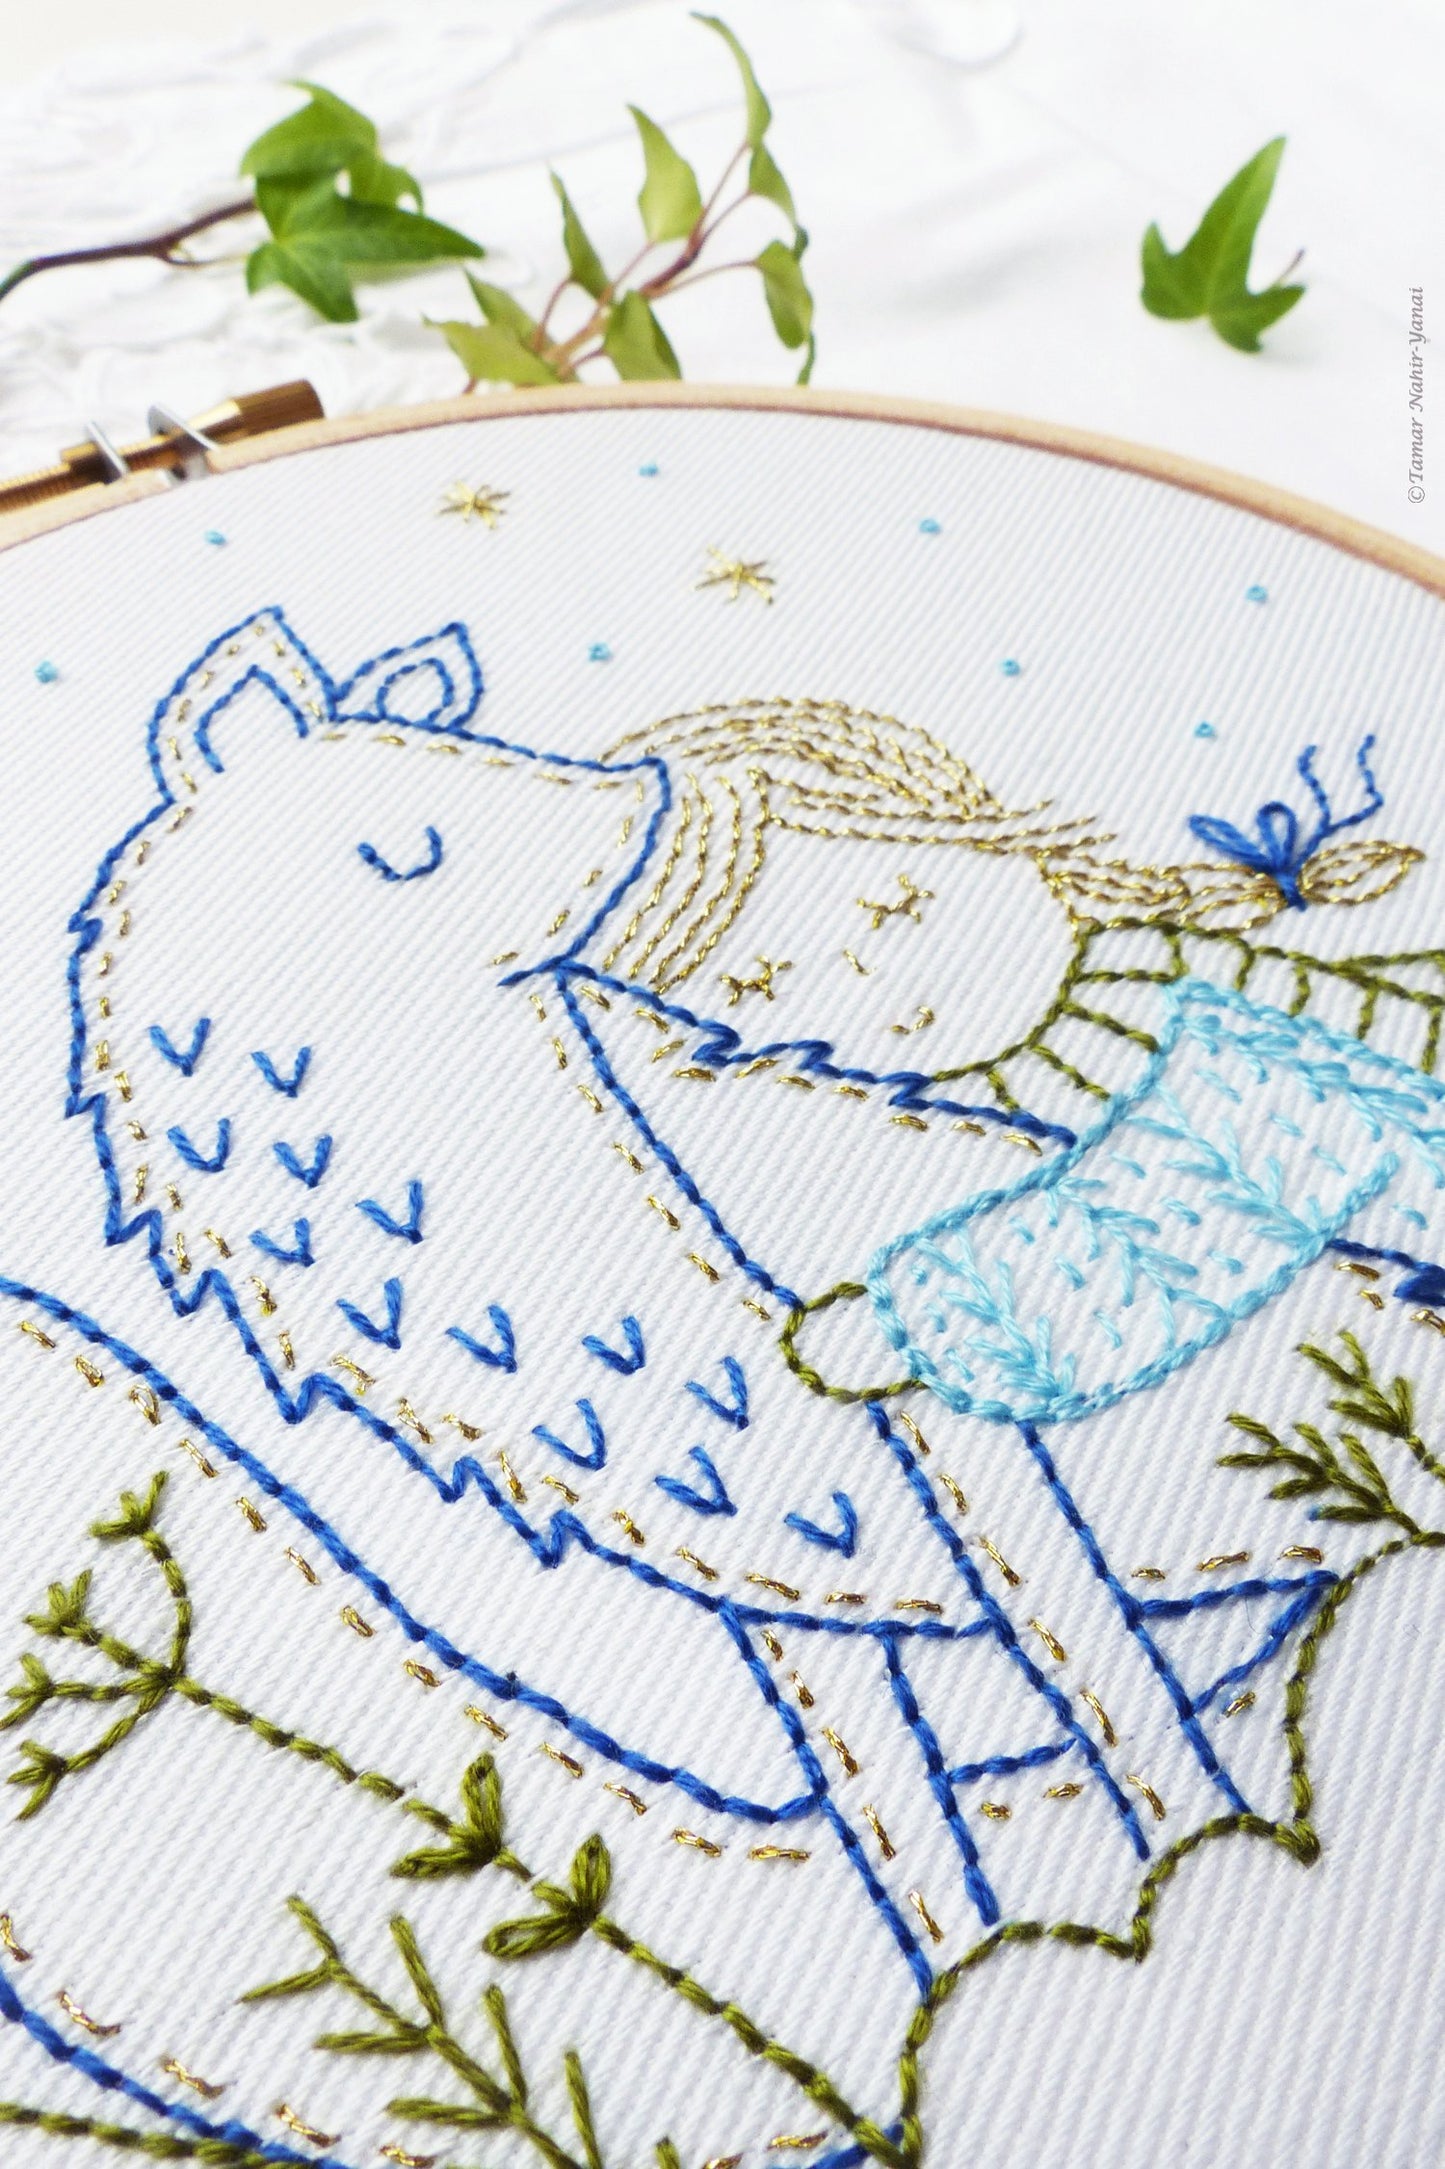 Winter Fox embroidery kit